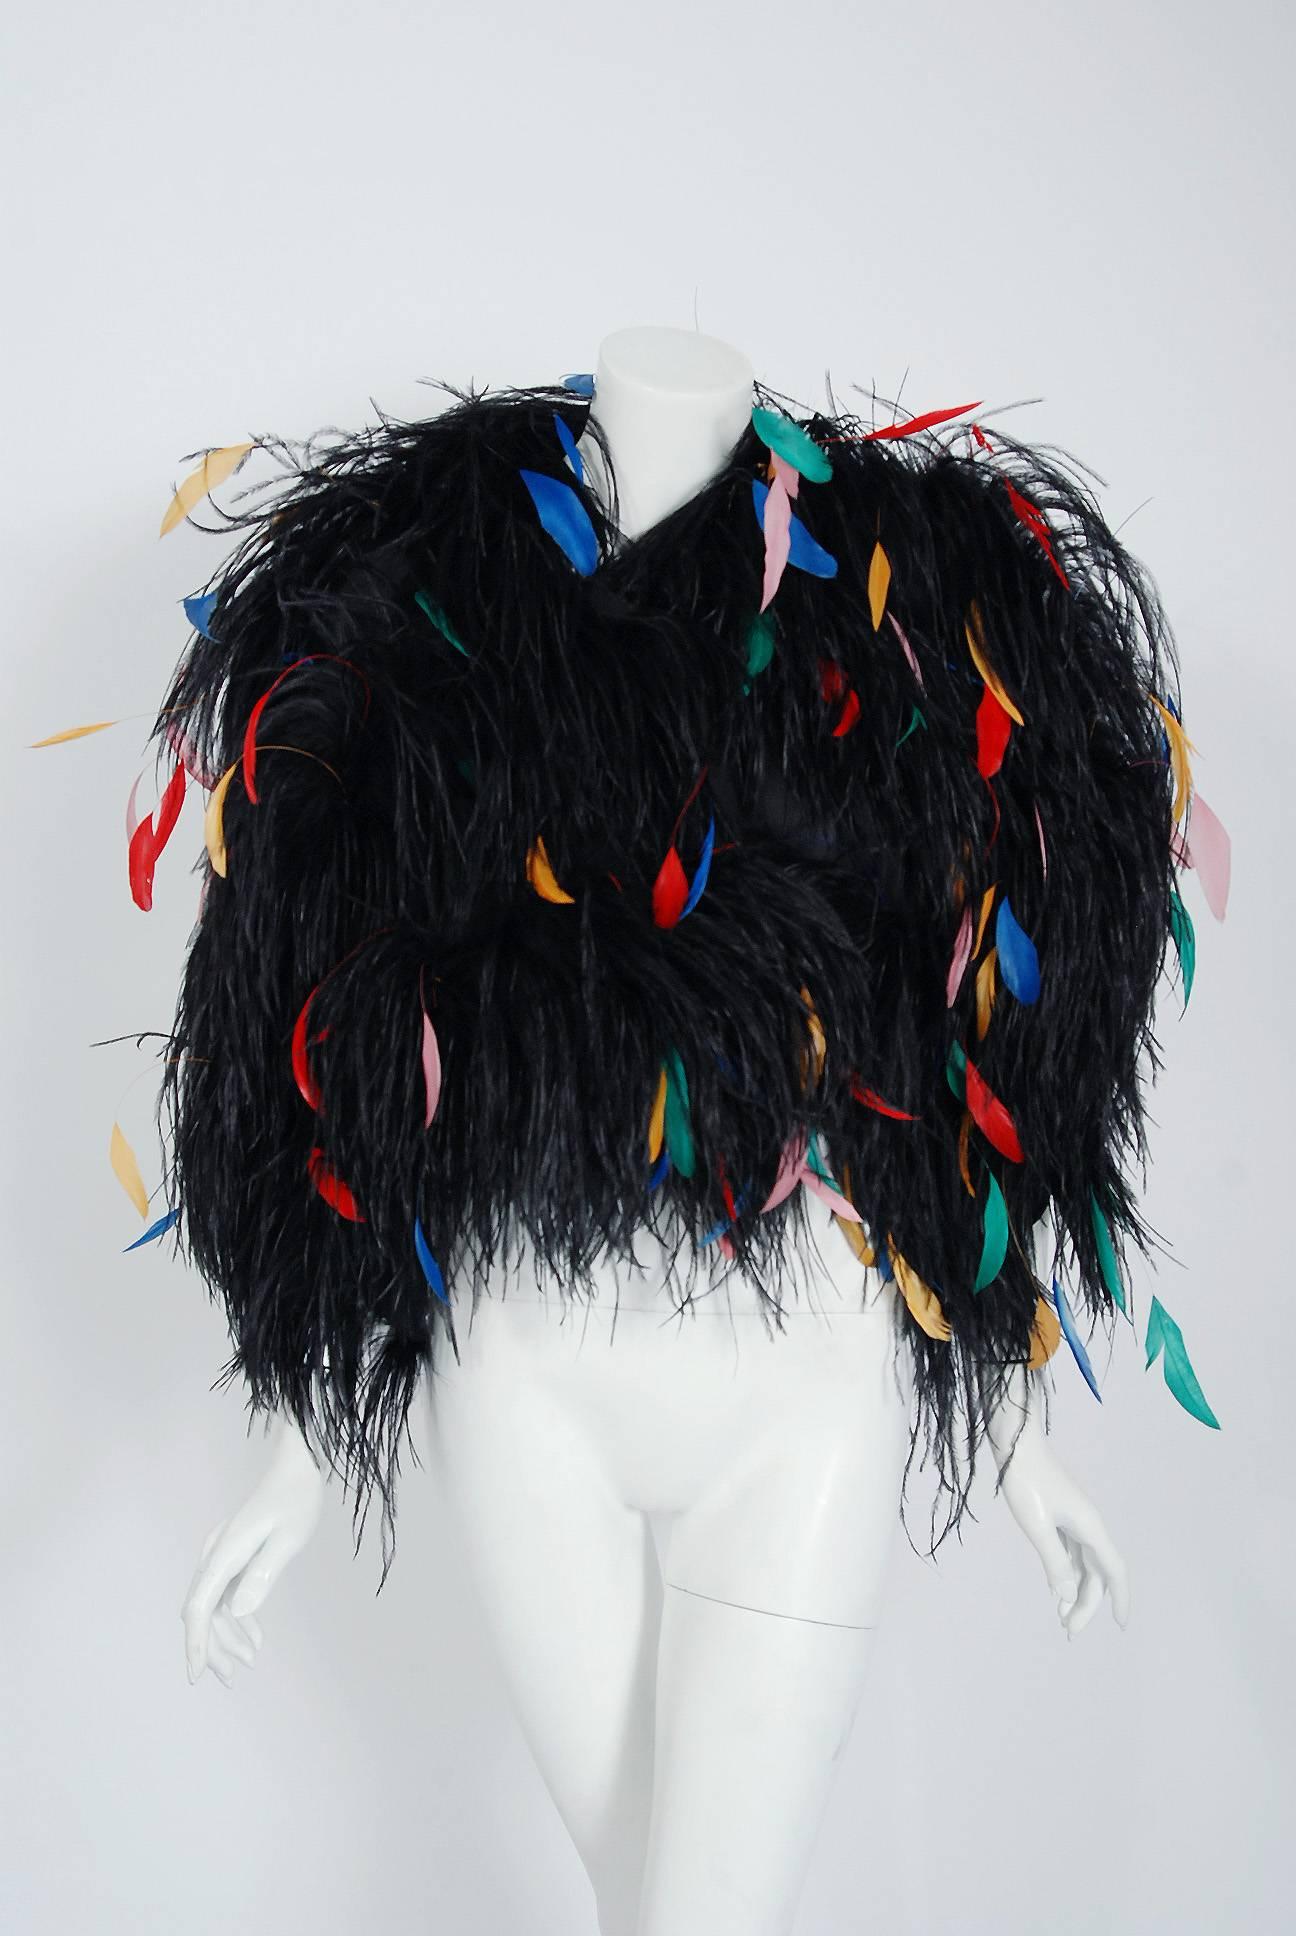 Breathtaking Bill Blass Couture rainbow feather bolero jacket dating back to his 1977 collection. Building upon the innovations of European designers such as Coco Chanel, Blass made clothes that allowed women a modern sense of ease. He made